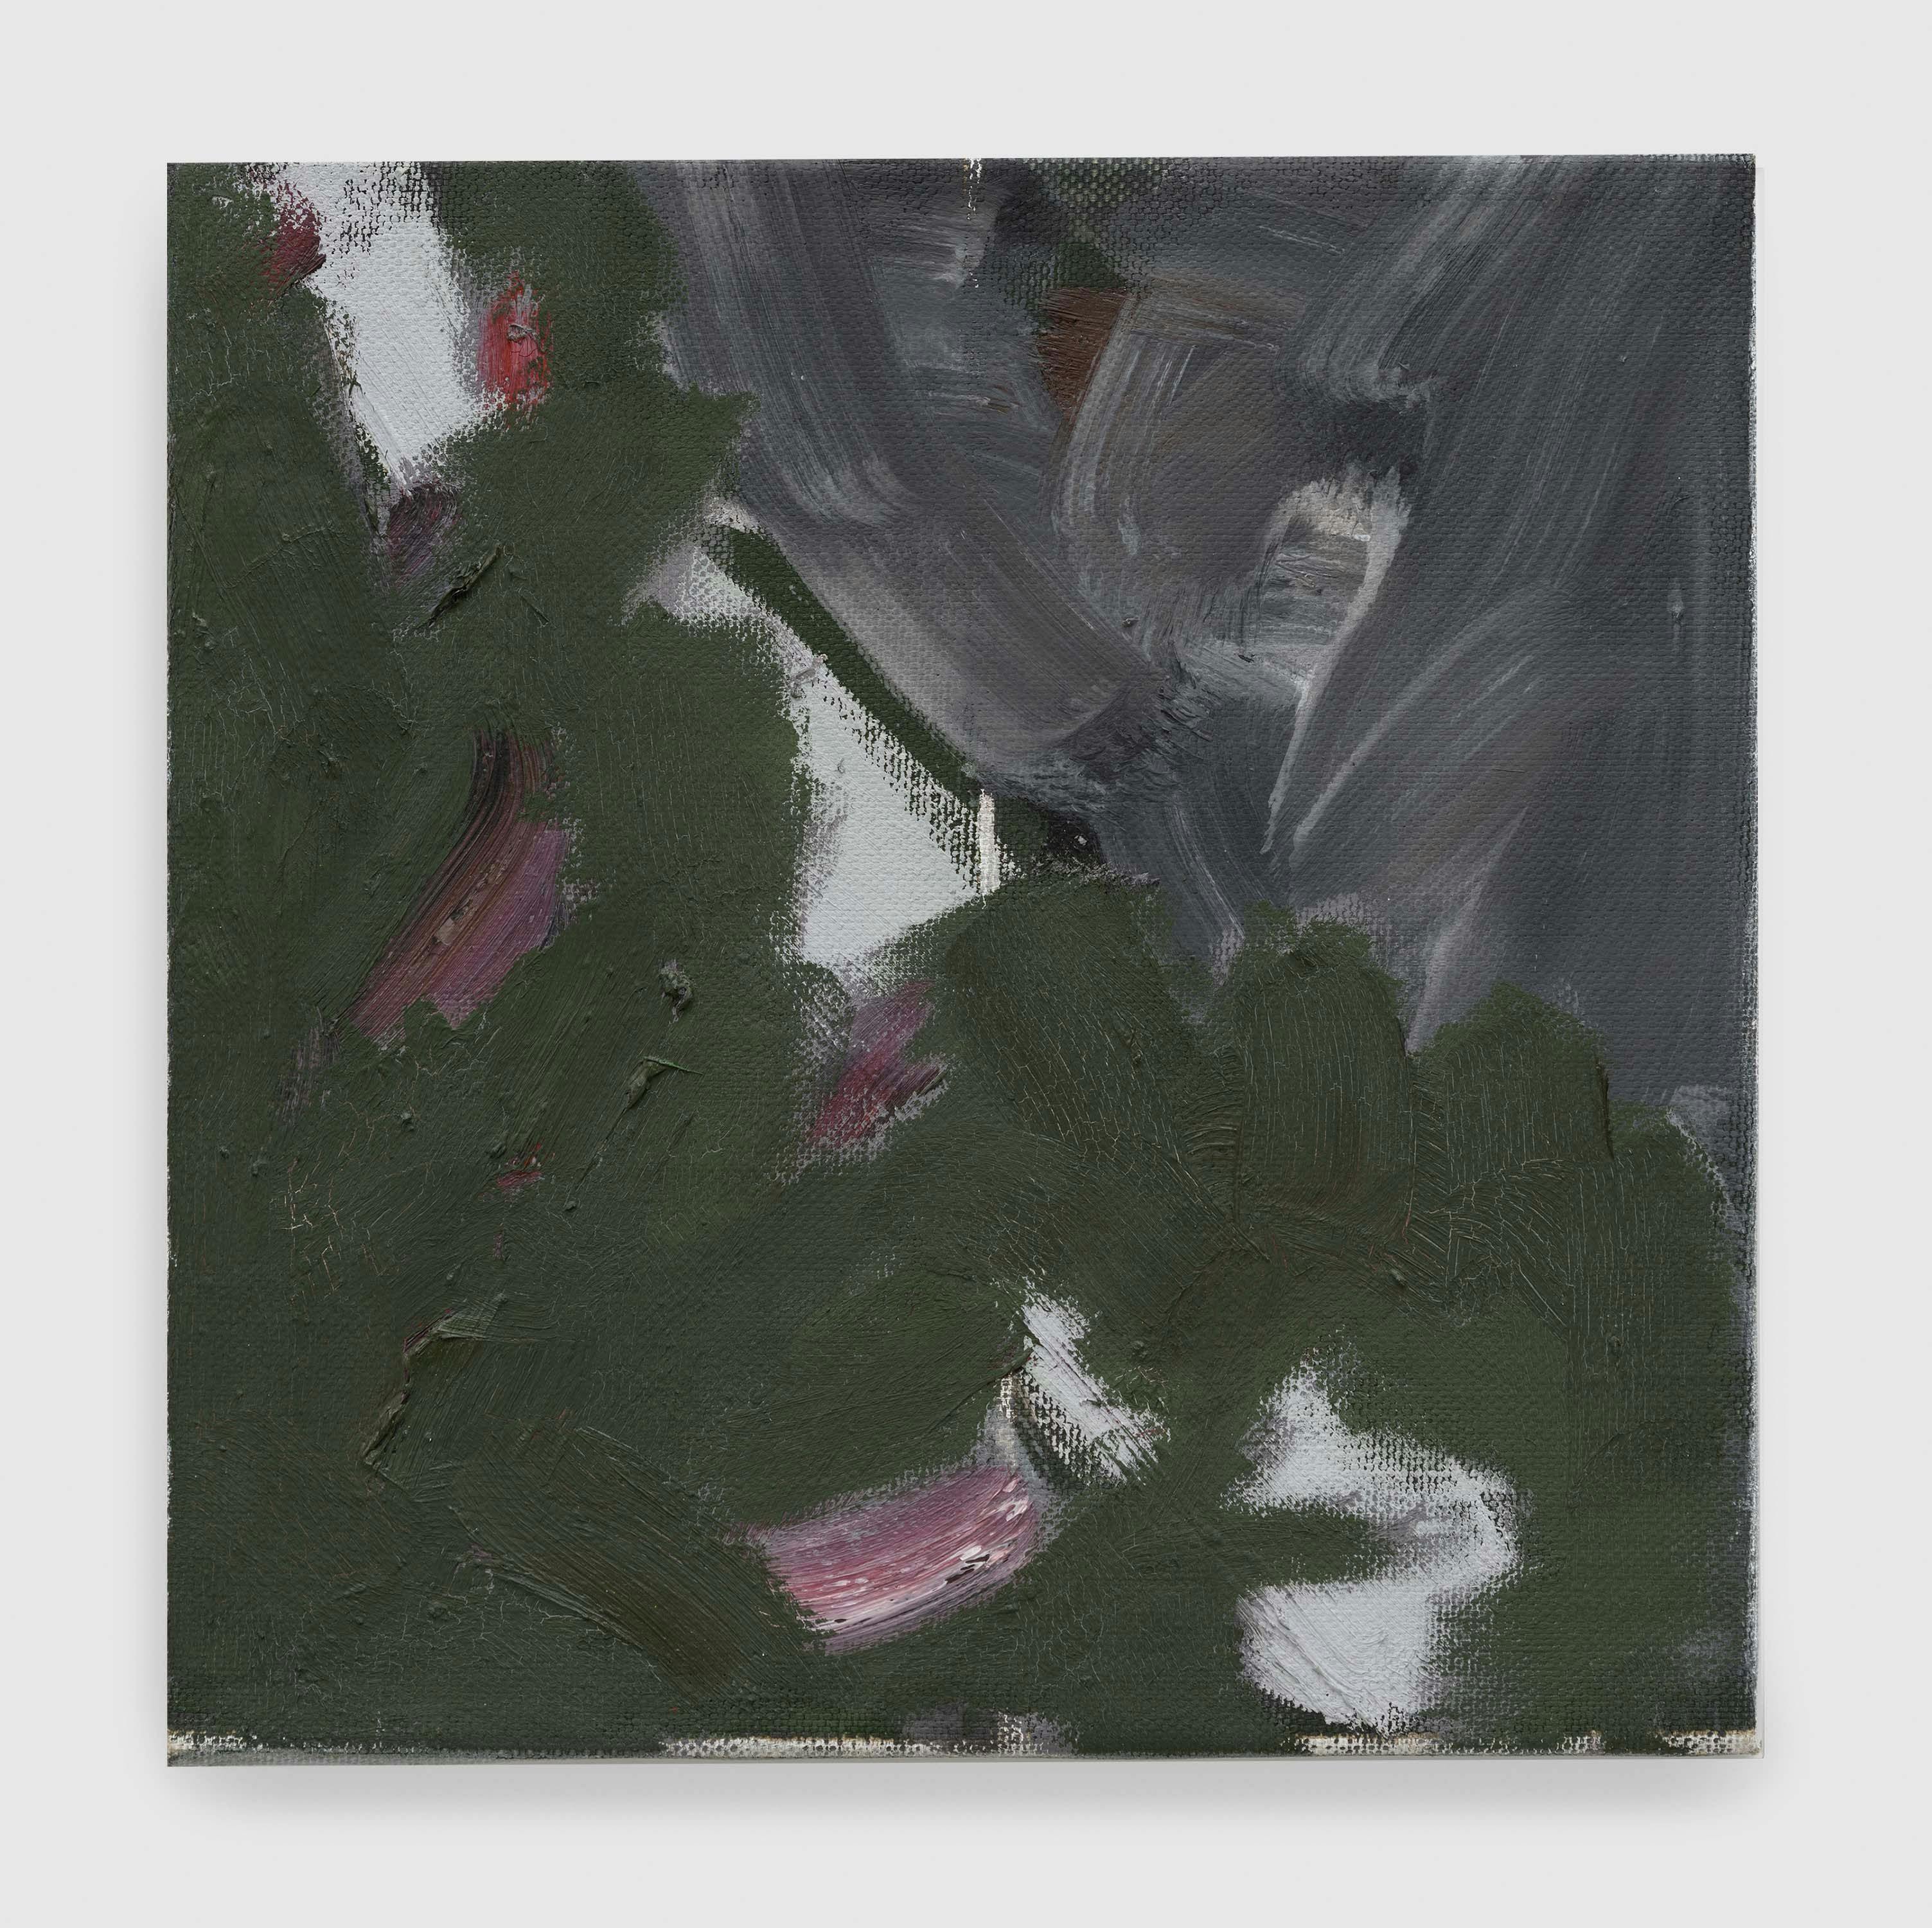 A painting by Raoul De Keyser, titled Tornado, dated 1981.